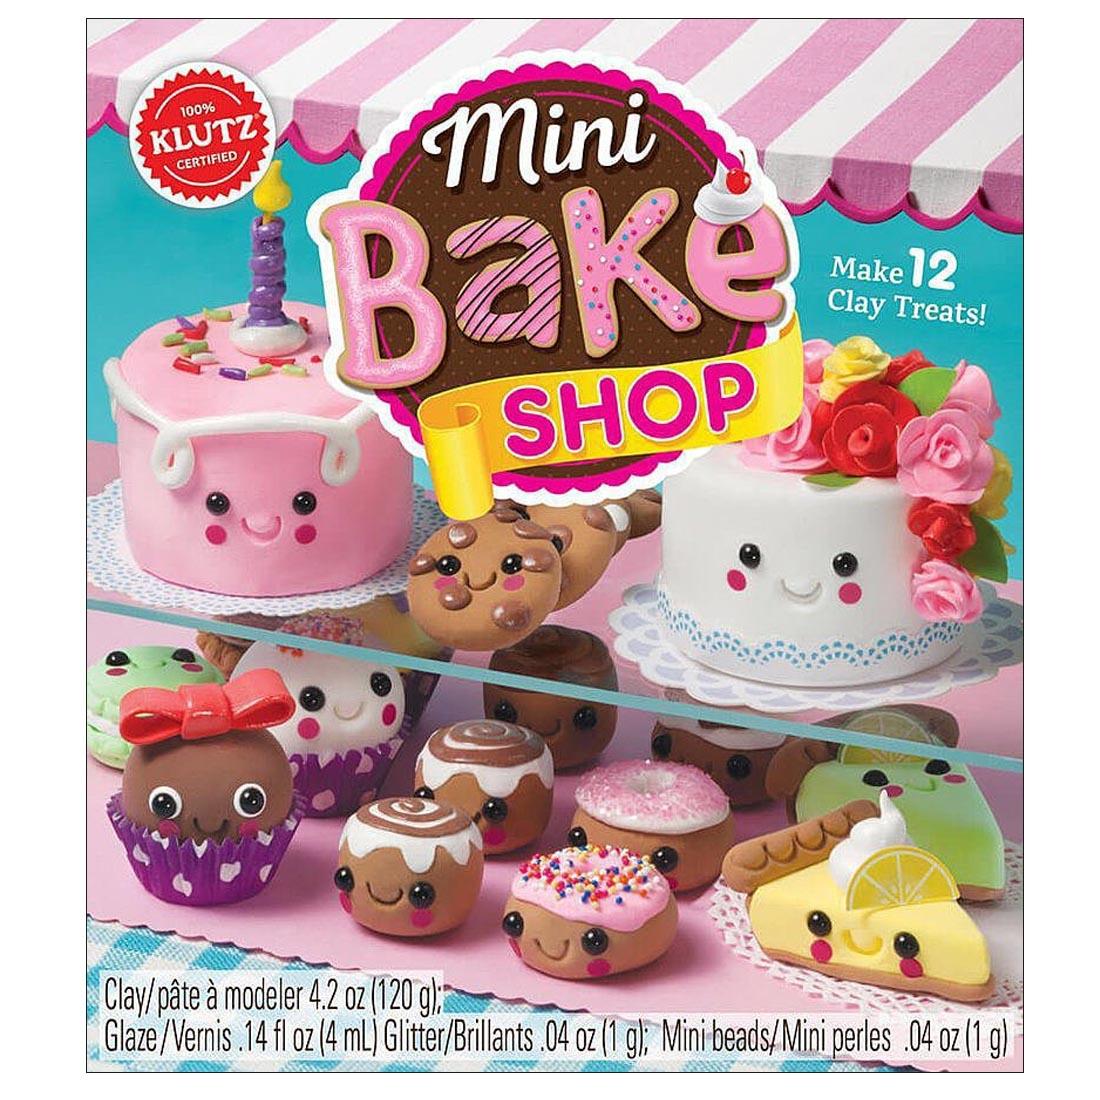 clay craft box shows completed projects of cakes, cookies, doughnuts, pie pieces and more